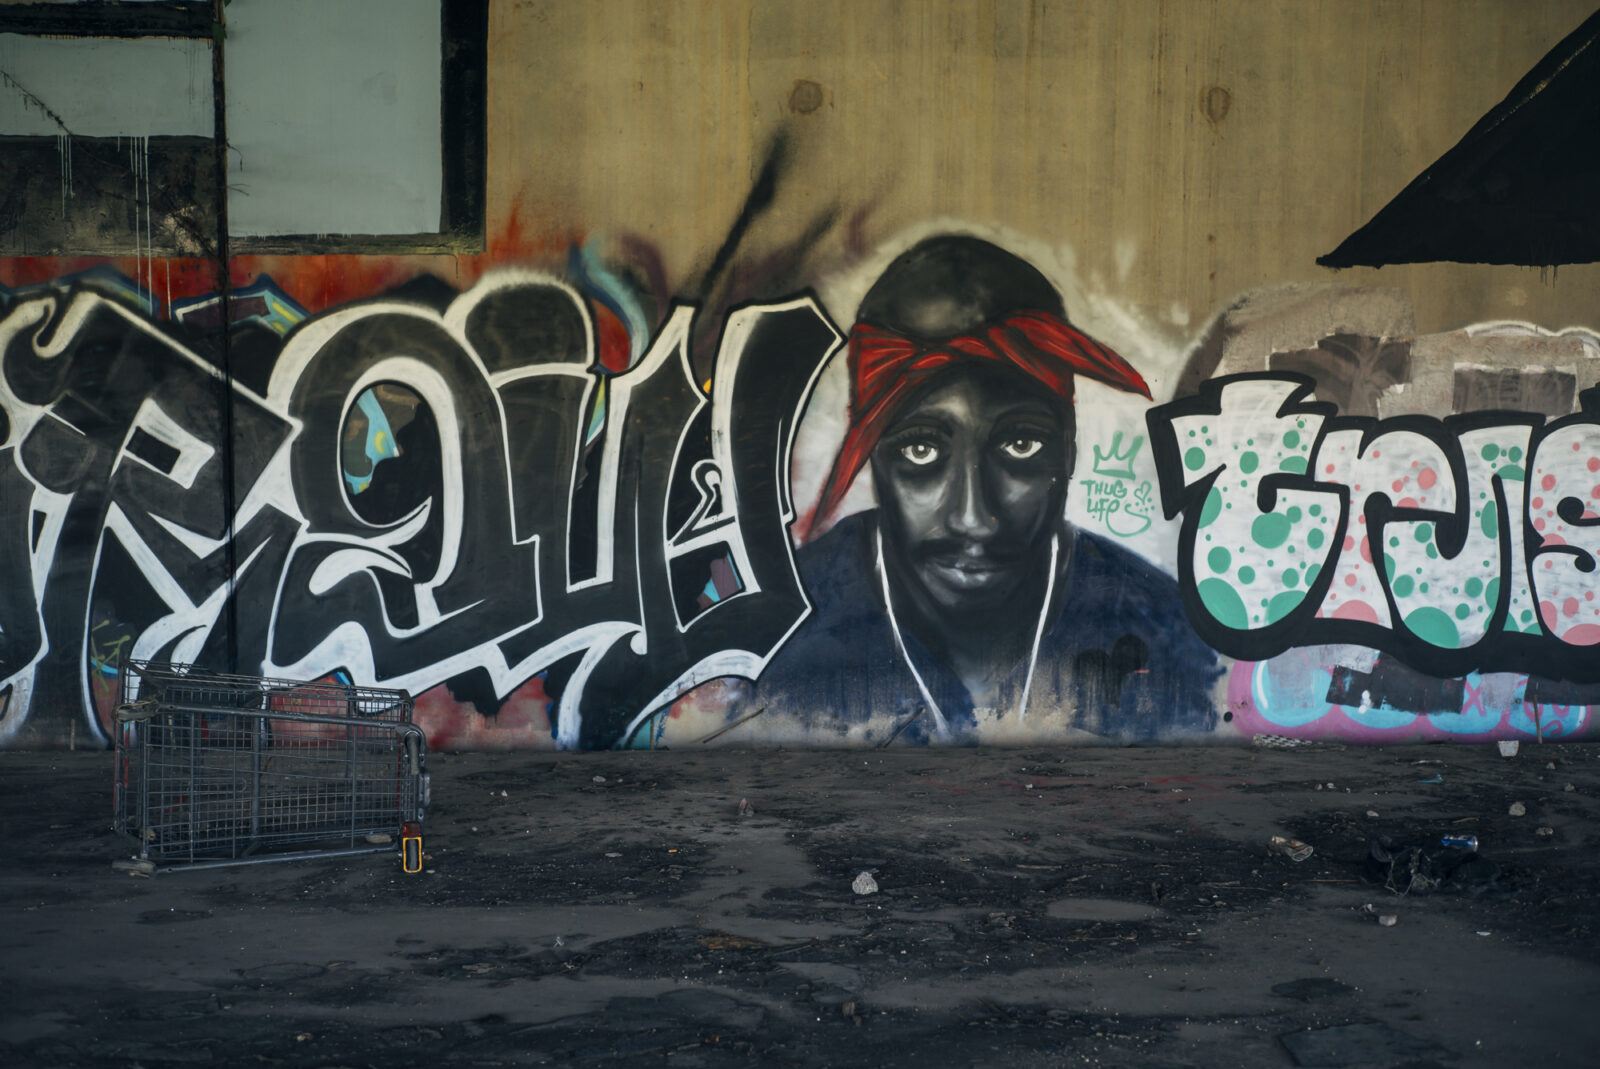 Tupac graffiti in an abandoned building in Austin, Texas